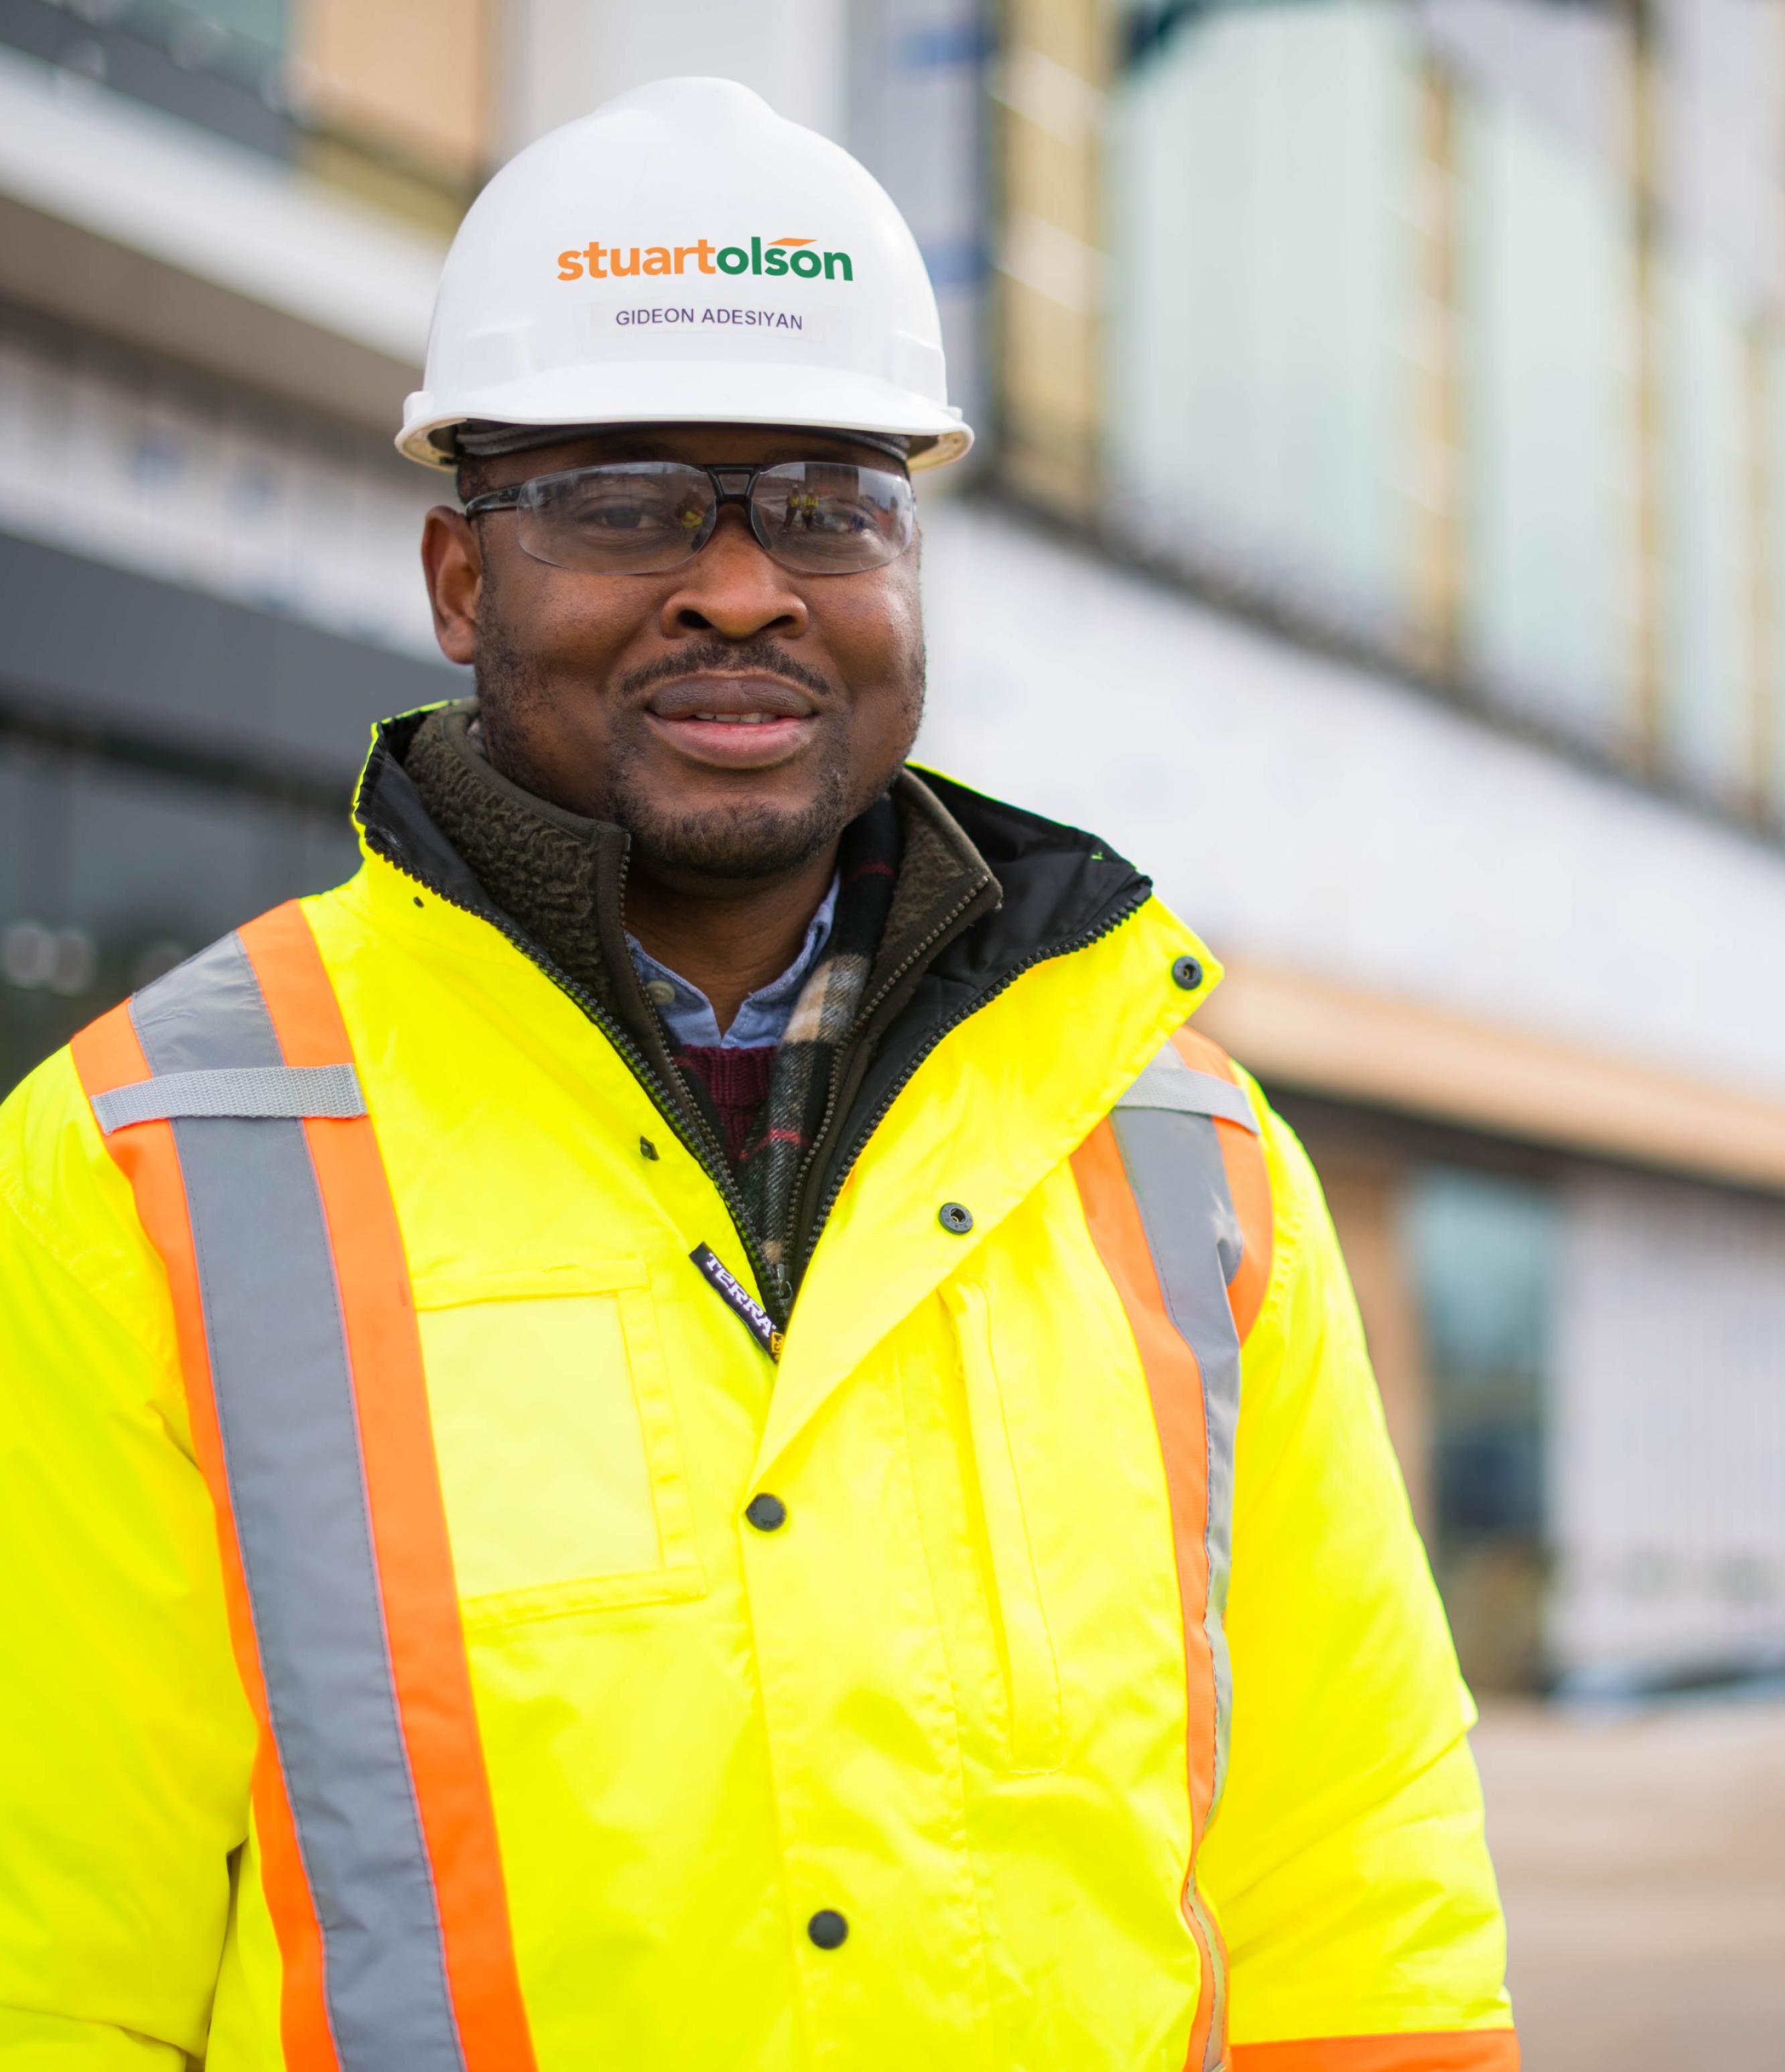 A man standing outside of a building, smiling at the camera, wearing a safety jacket and a hard hat that says 'Stuart Olson'.